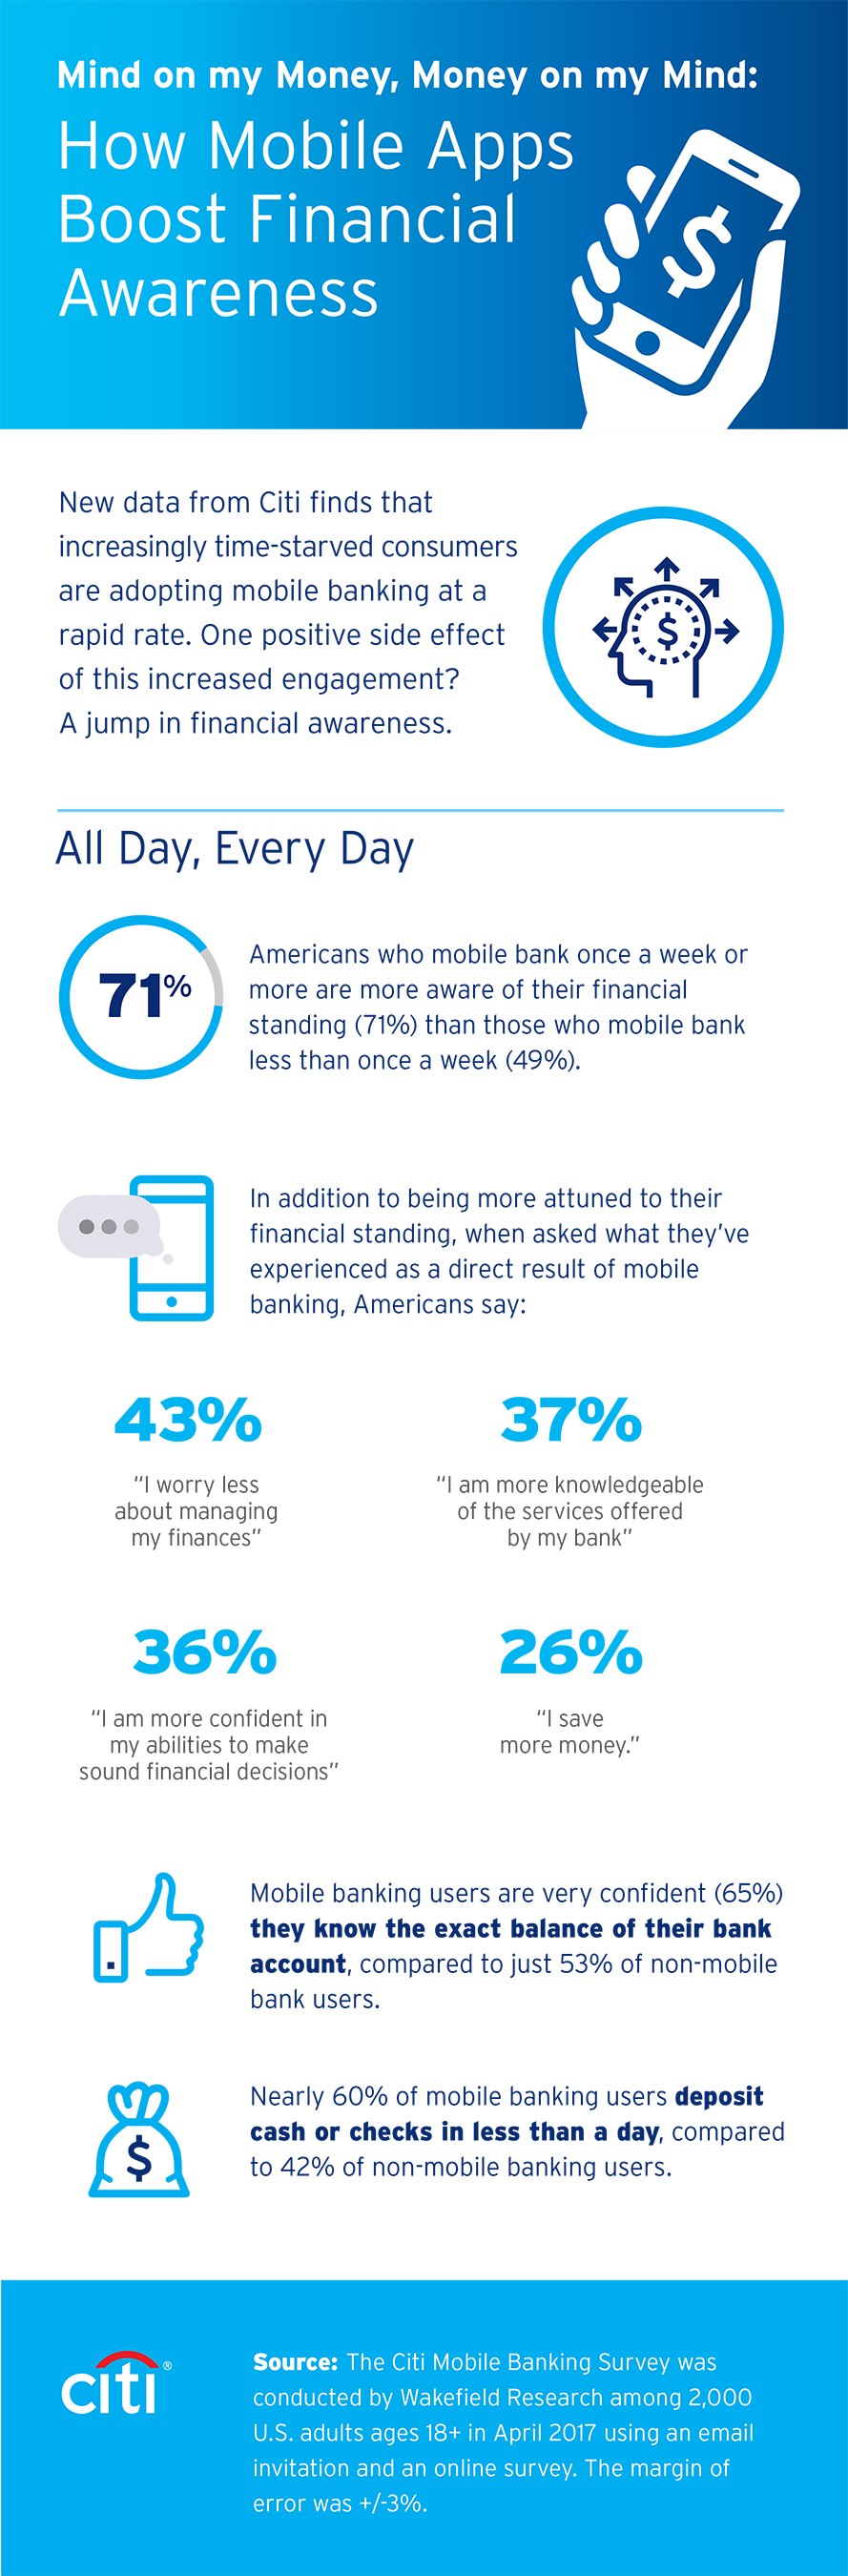 Citi’s 2017 Mobile Banking Study illustrates how mobile banking apps help boost financial awareness.